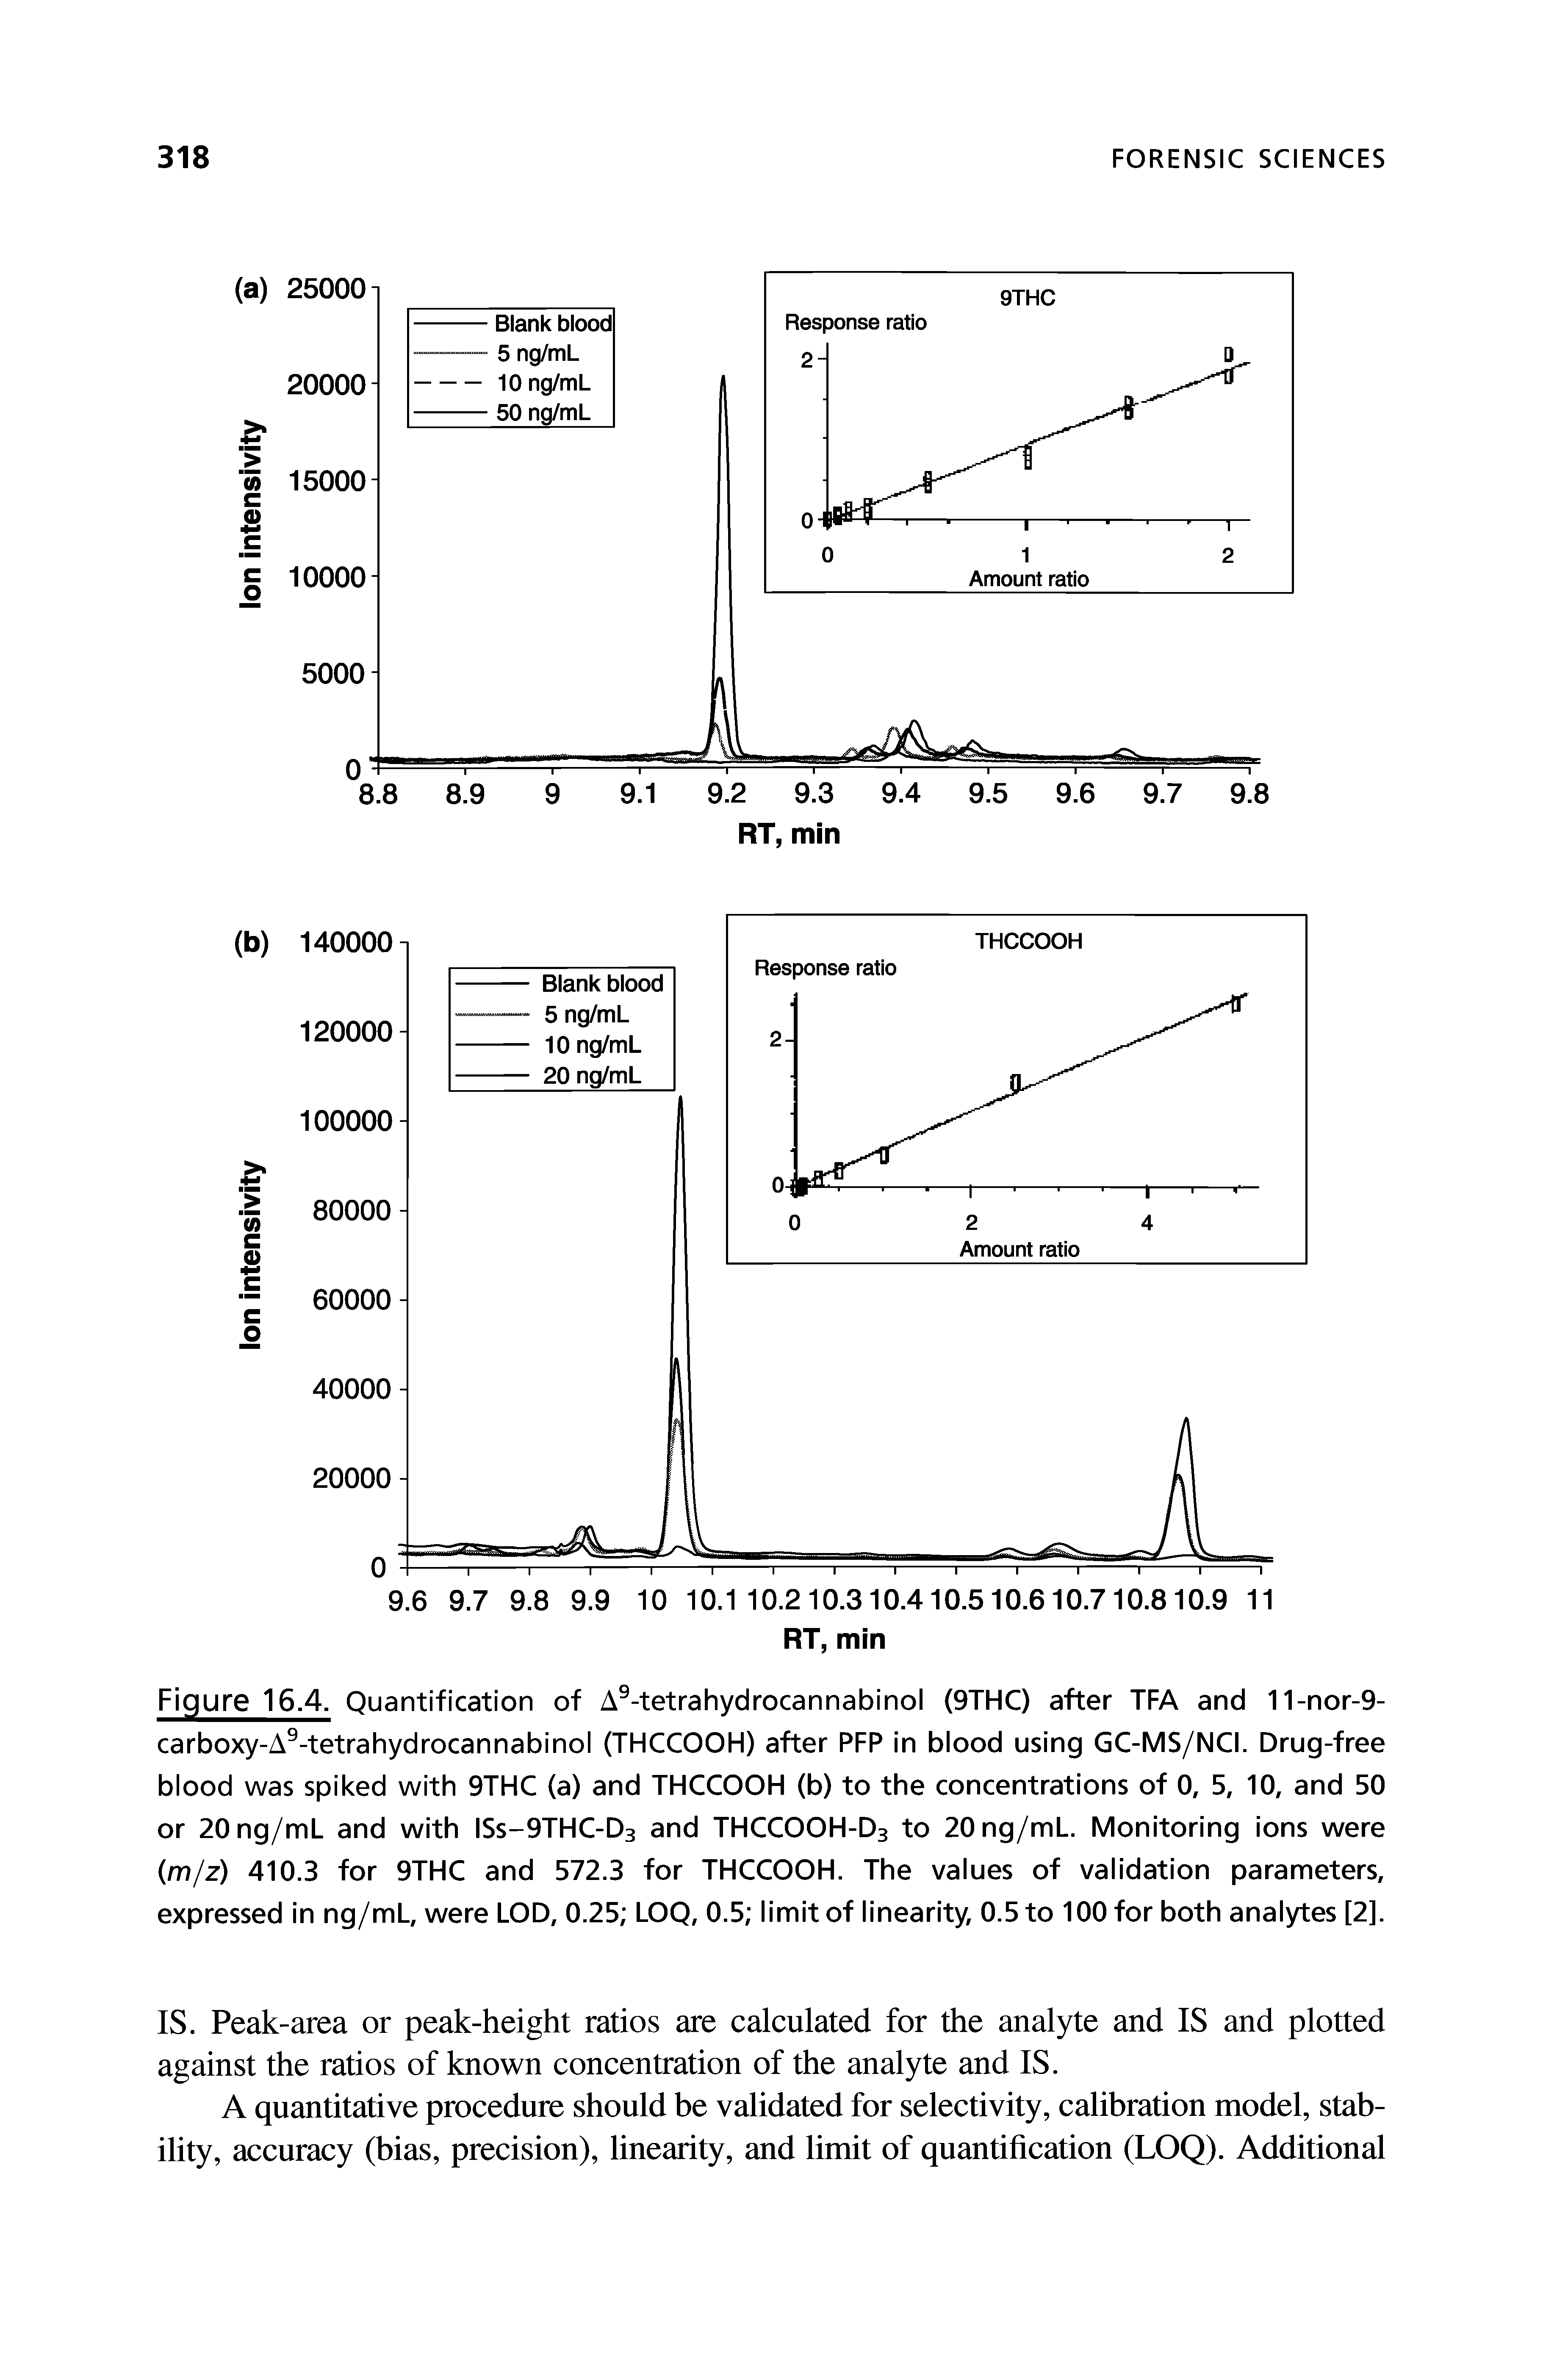 Figure 16.4. Quantification of A9-tetrahydrocannabinol (9THC) after TFA and 11-nor-9-carboxy-A9-tetrahydrocannabinol (THCCOOH) after PFP in blood using GC-MS/NCI. Drug-free blood was spiked with 9THC (a) and THCCOOH (b) to the concentrations of 0, 5, 10, and 50 or 20ng/mL and with ISs-9THC-D3 and THCCOOH-D3 to 20ng/mL. Monitoring ions were (m/z) 410.3 for 9THC and 572.3 for THCCOOH. The values of validation parameters, expressed in ng/mL, were LOD, 0.25 LOQ, 0.5 limit of linearity, 0.5 to 100 for both analytes [2].